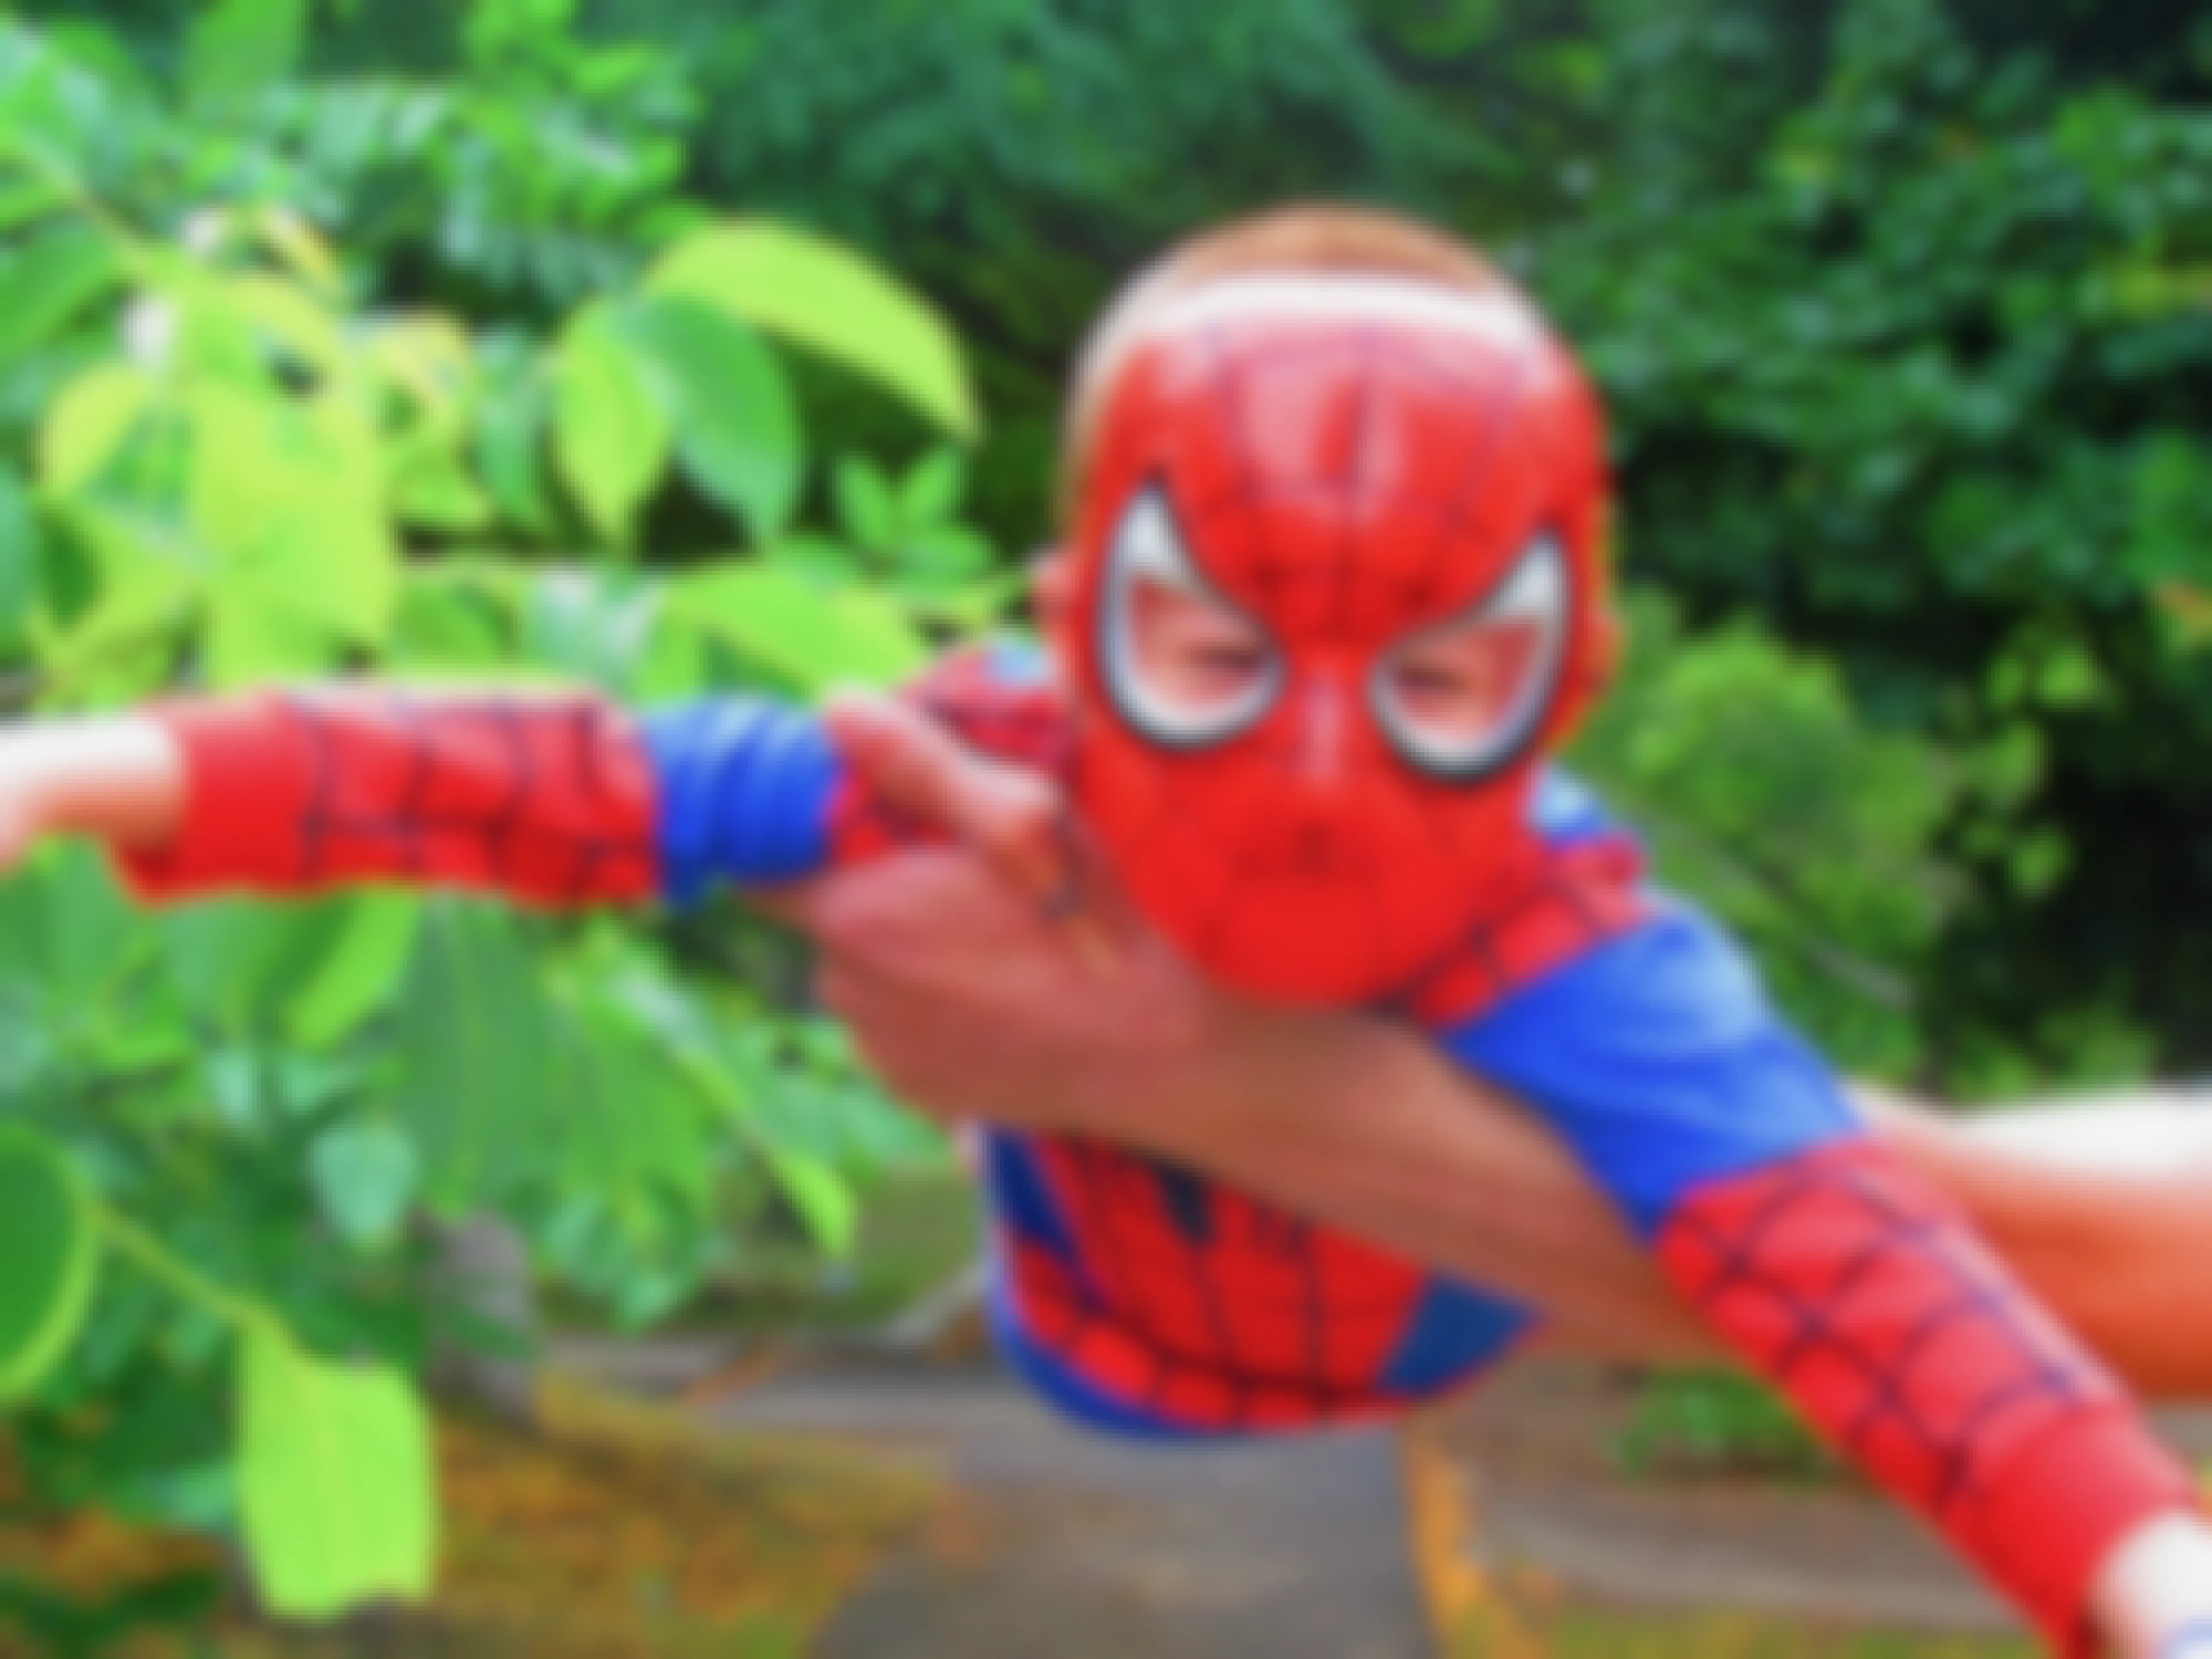 A child dressed as Spider-Man being held in the air.